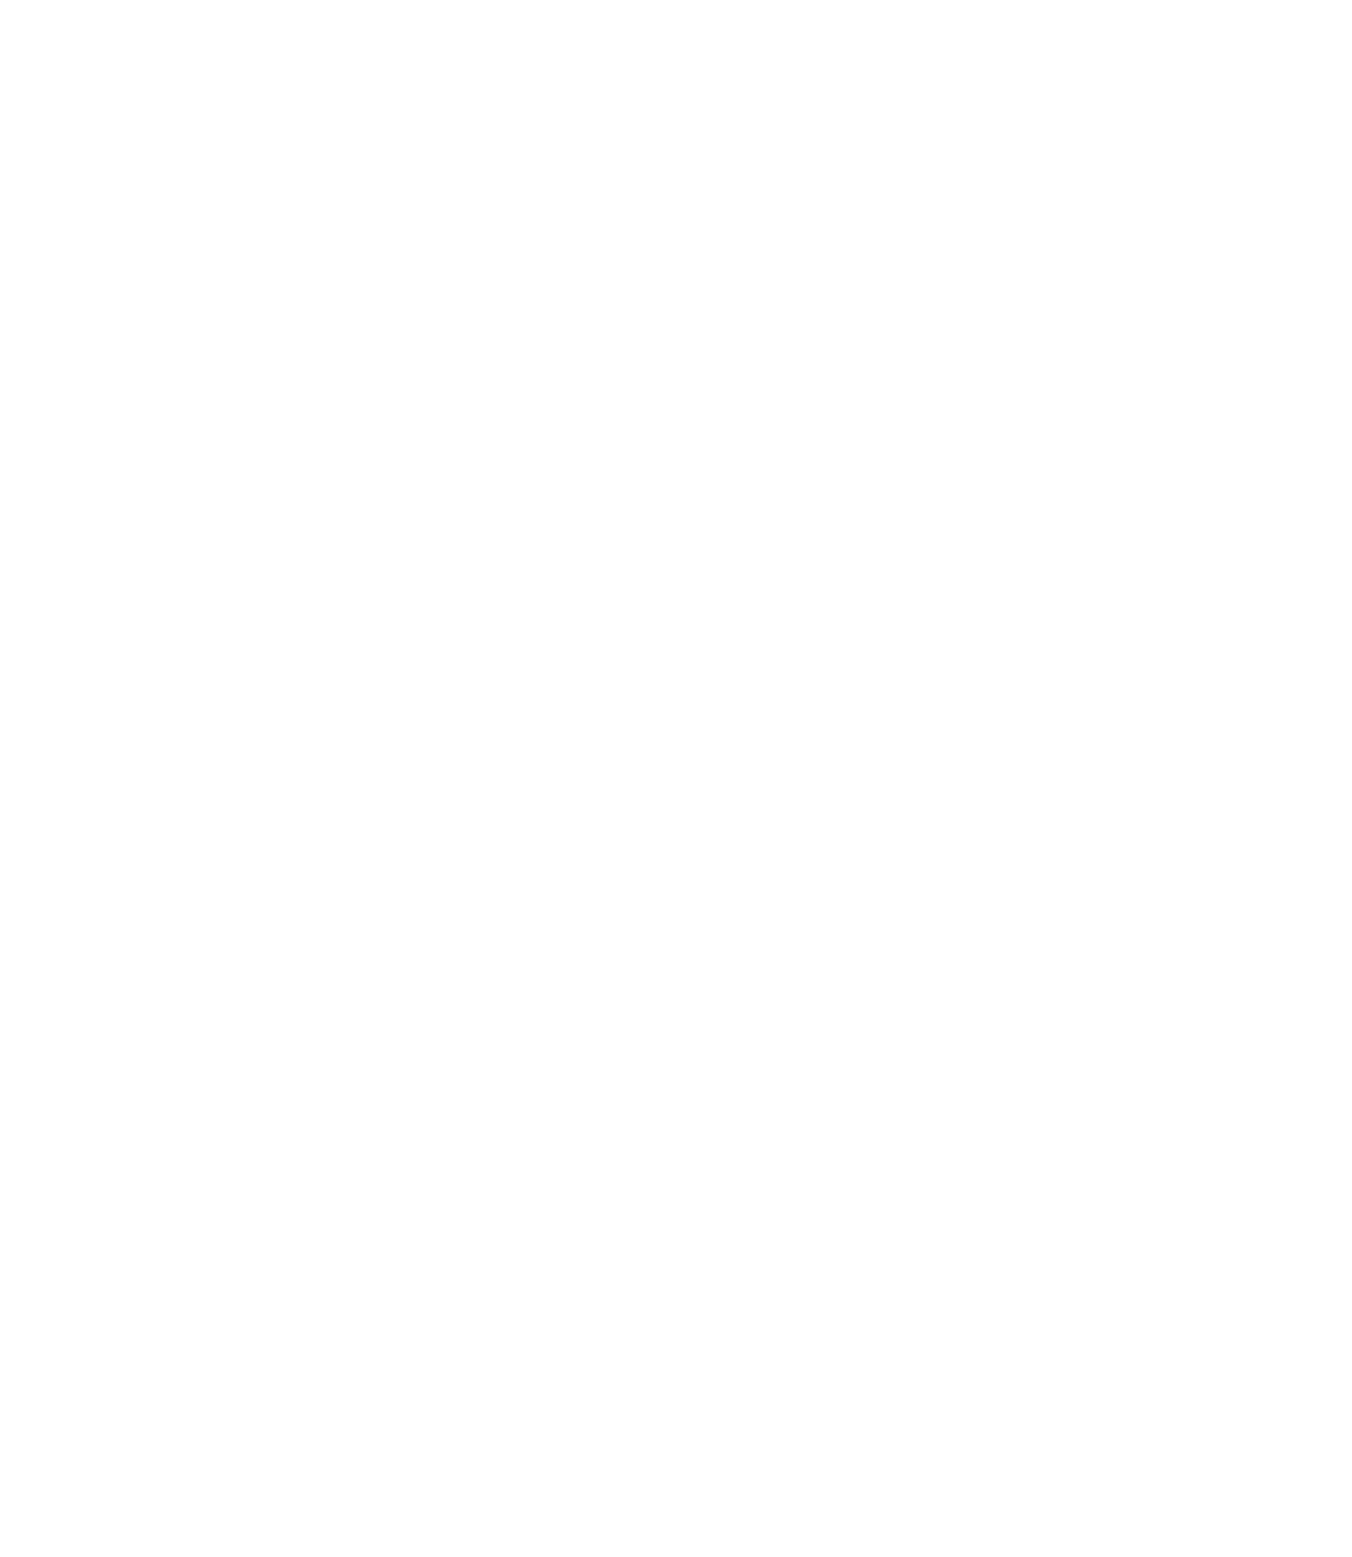 Universal Technical Institute logo for dark backgrounds (transparent PNG)